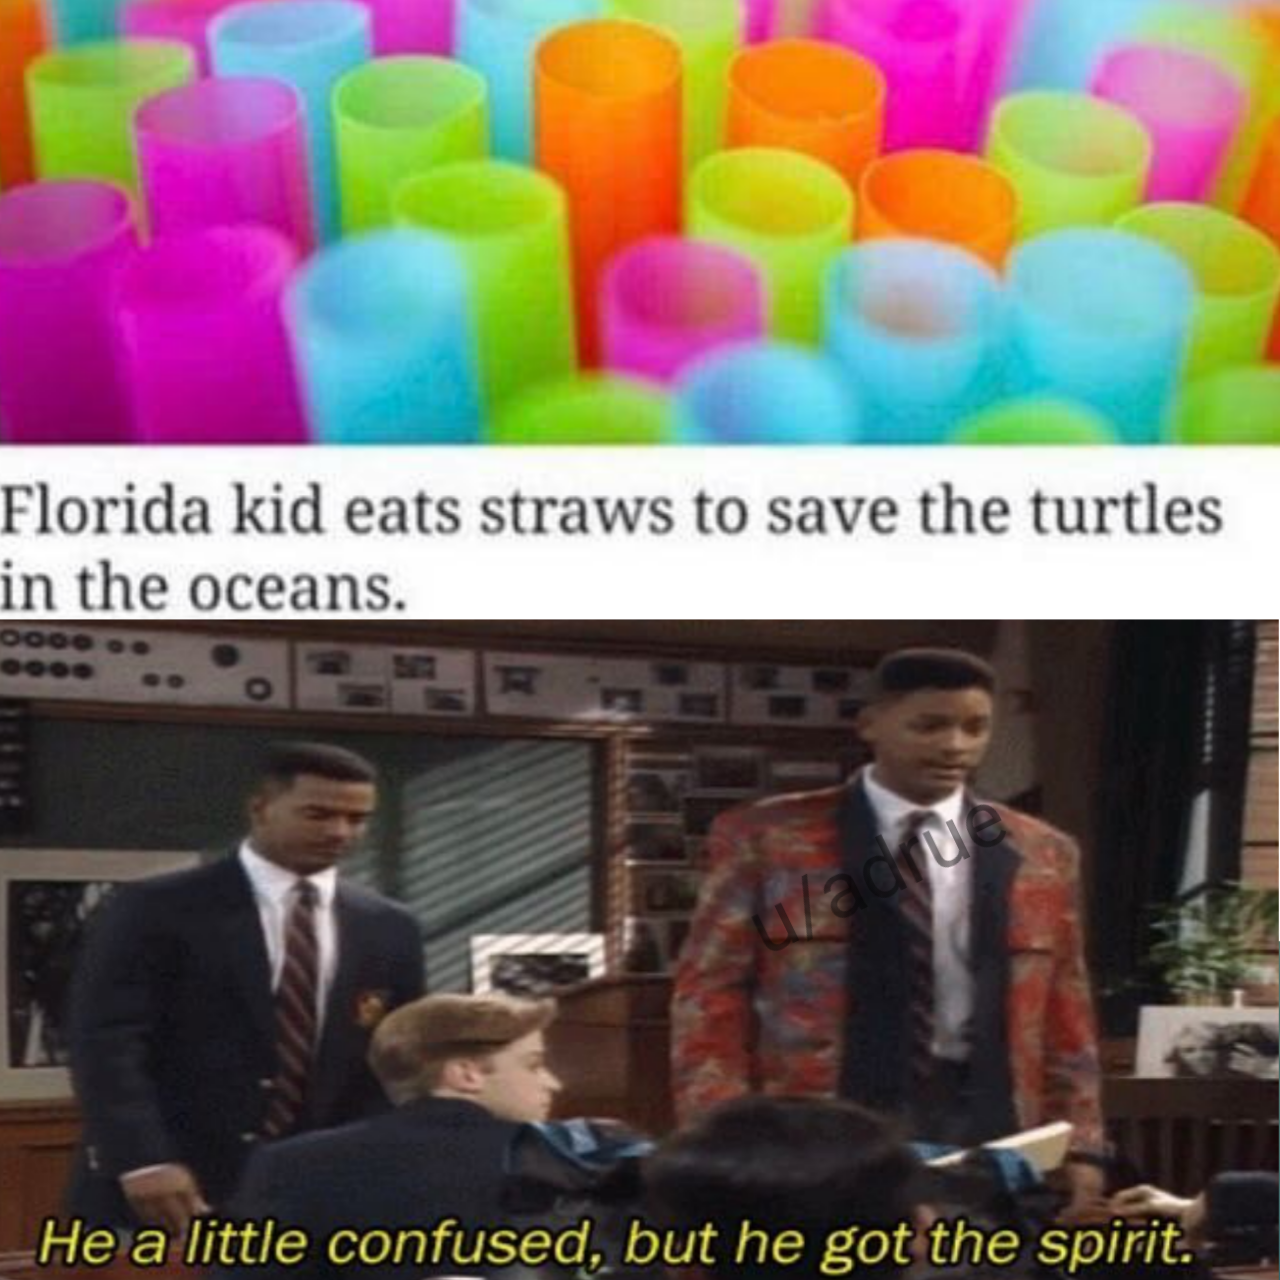 Florida kid eats straws to save the turtles in the oceans. He a little confused, but he got the spirit.